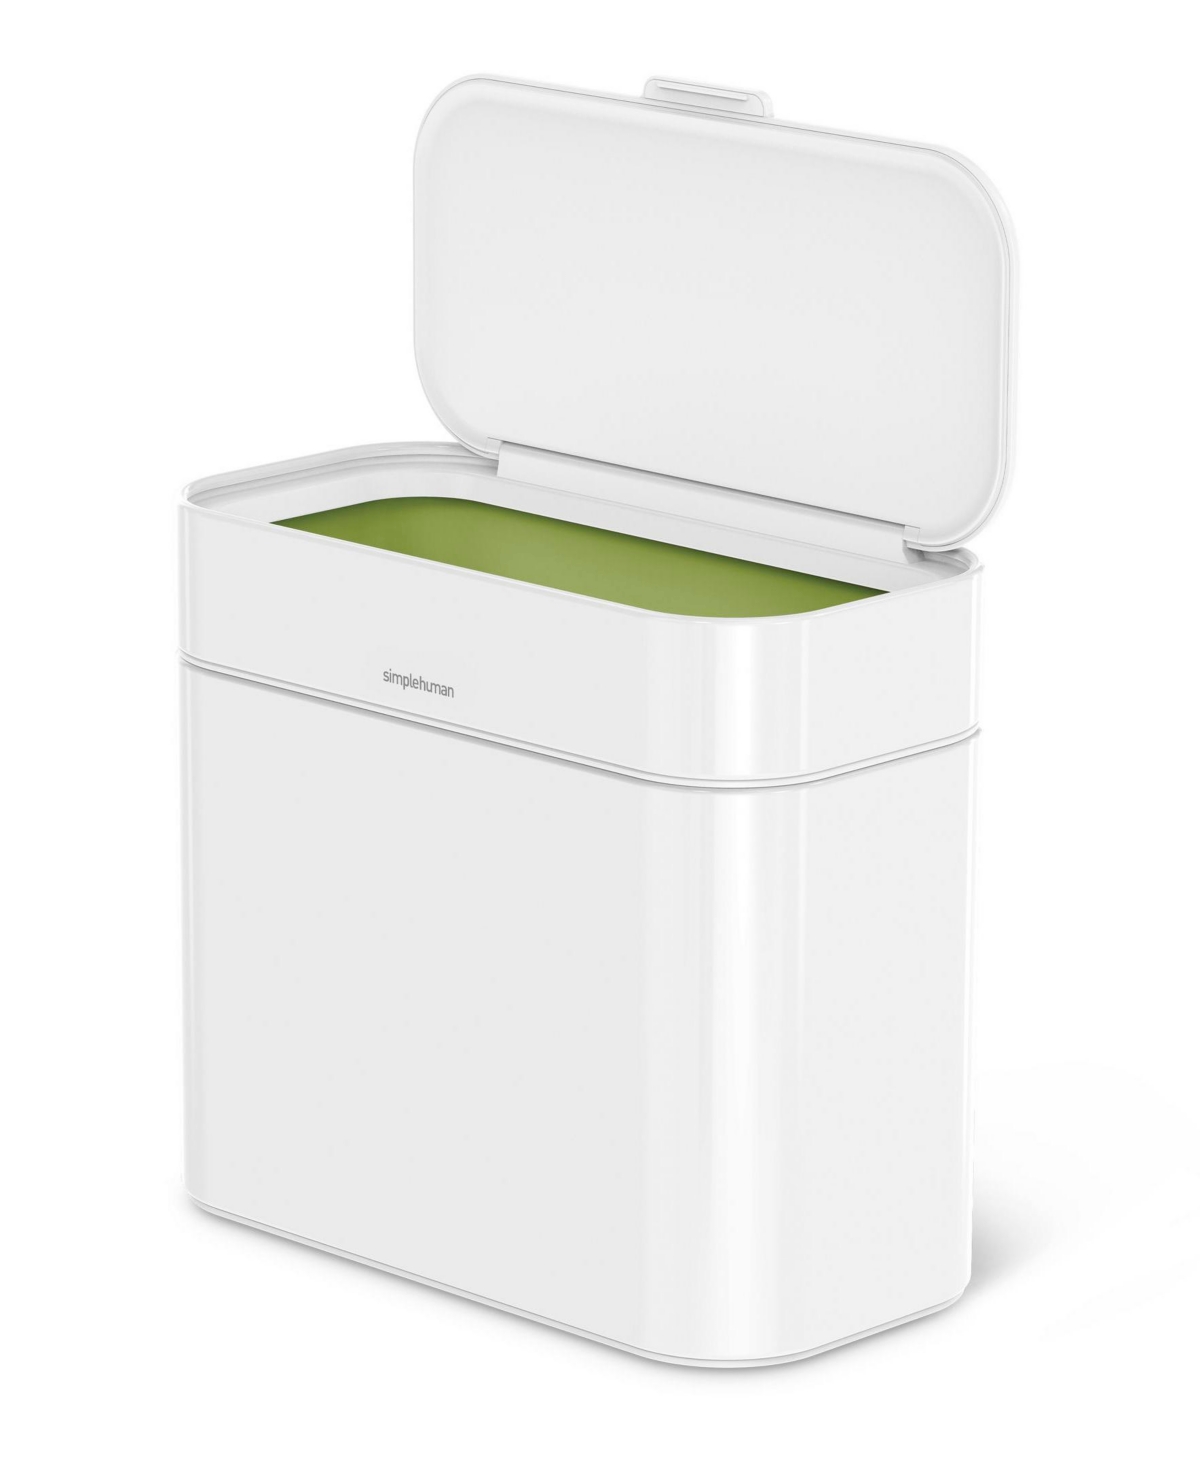 Simplehuman Compost Caddy, 4 Liter In White Stainless Steel